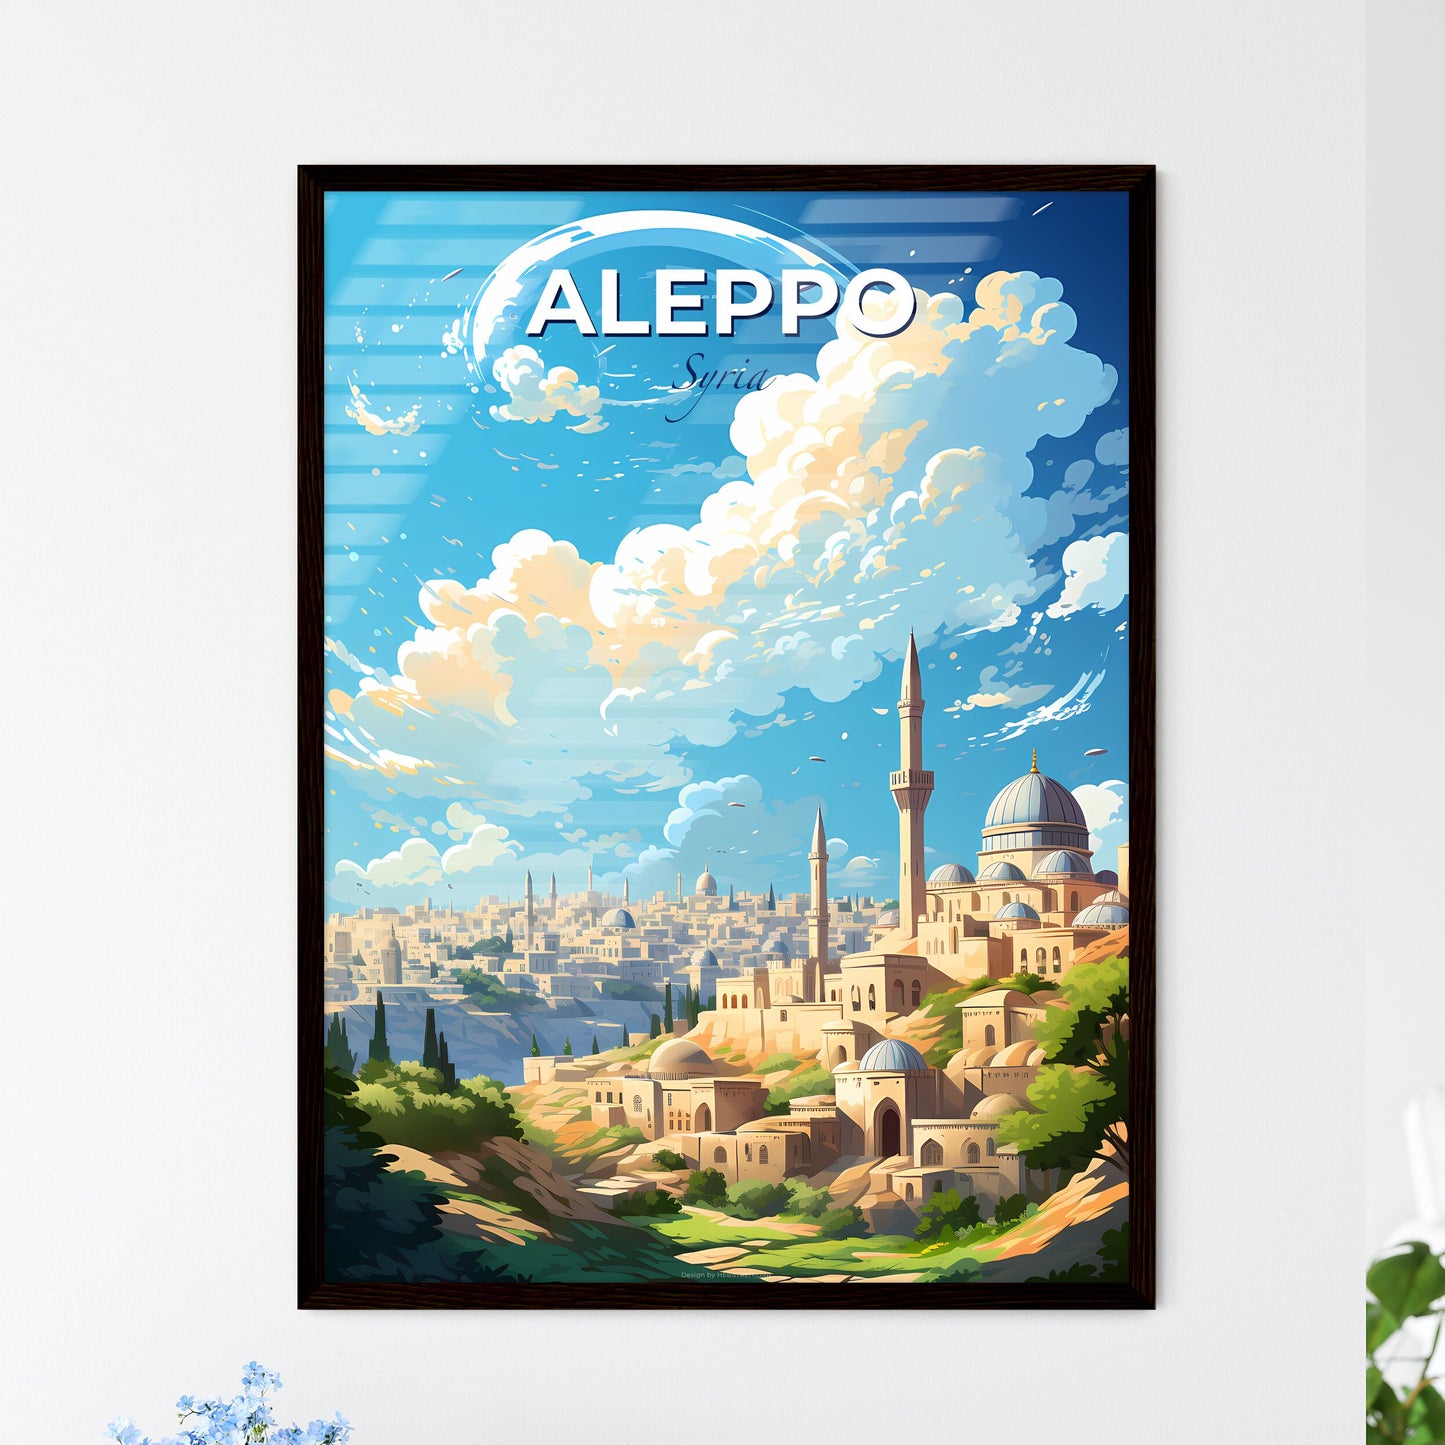 Aleppo Syria Skyline - A City With Towers And Towers On A Hill - Customizable Travel Gift Default Title